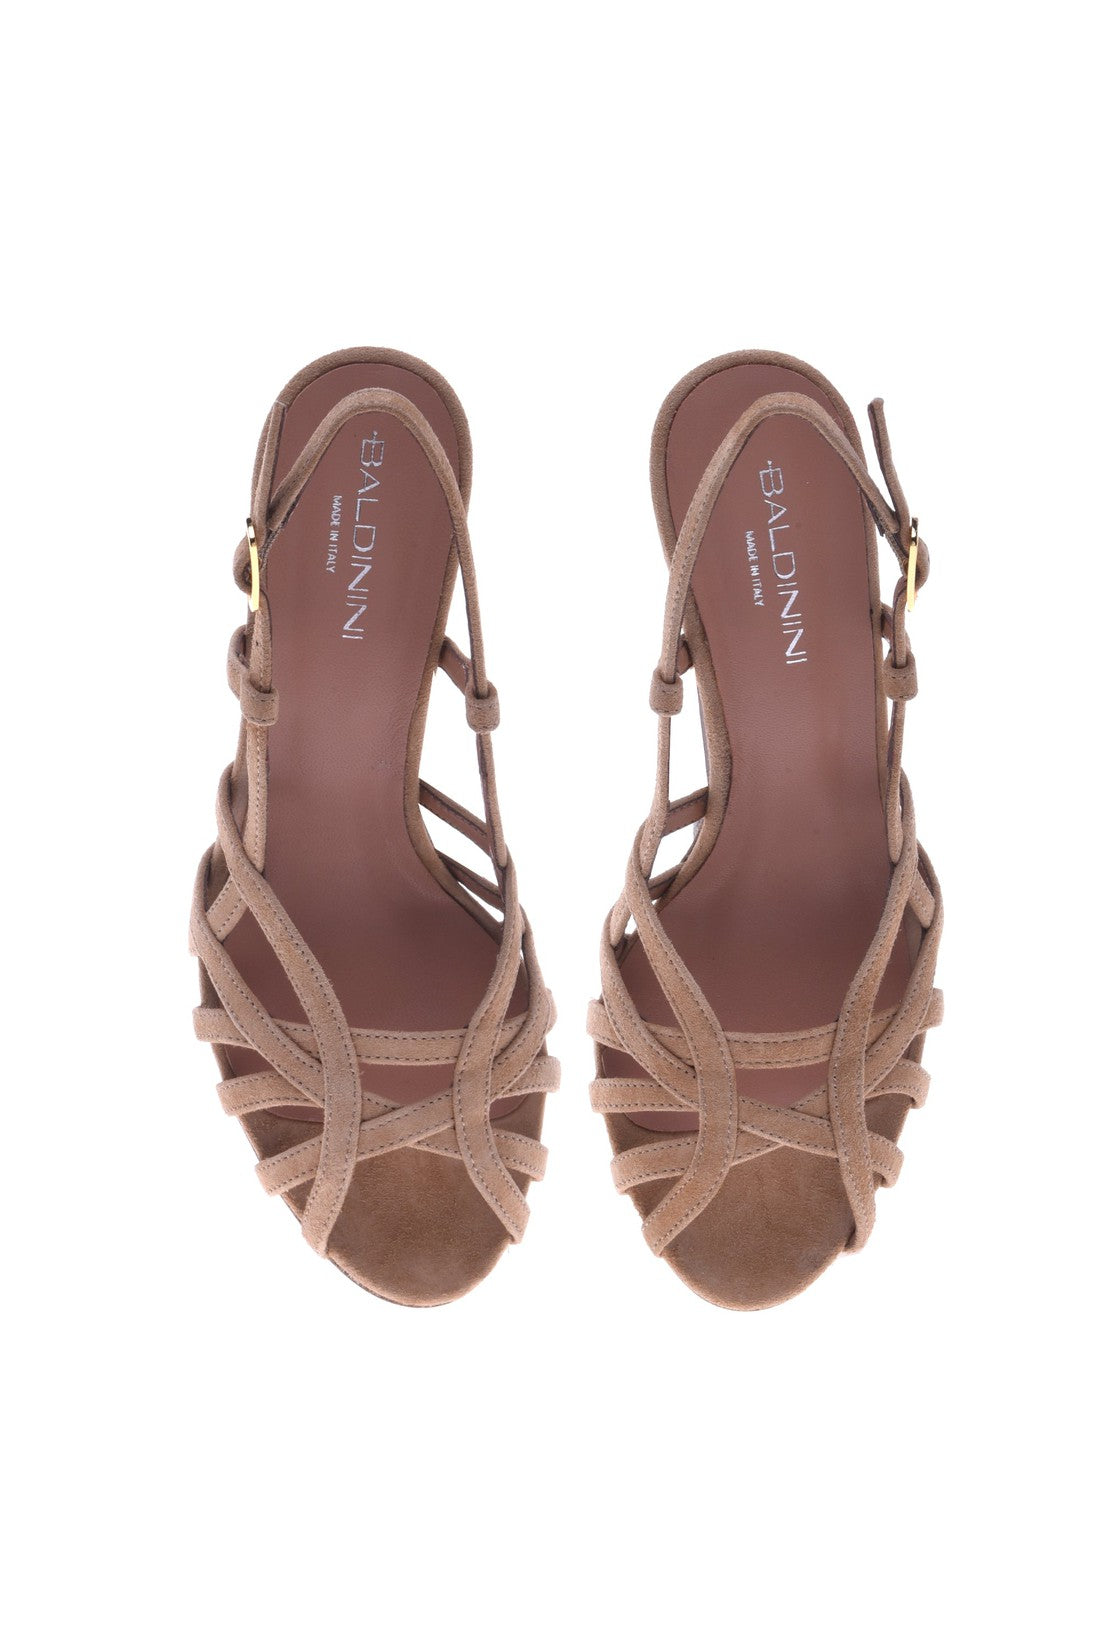 BALDININI-OUTLET-SALE-Sandal-in-taupe-suede-Sandalen-ARCHIVE-COLLECTION-2_9f999fcb-a621-4279-baad-e7df55bc98d2.jpg